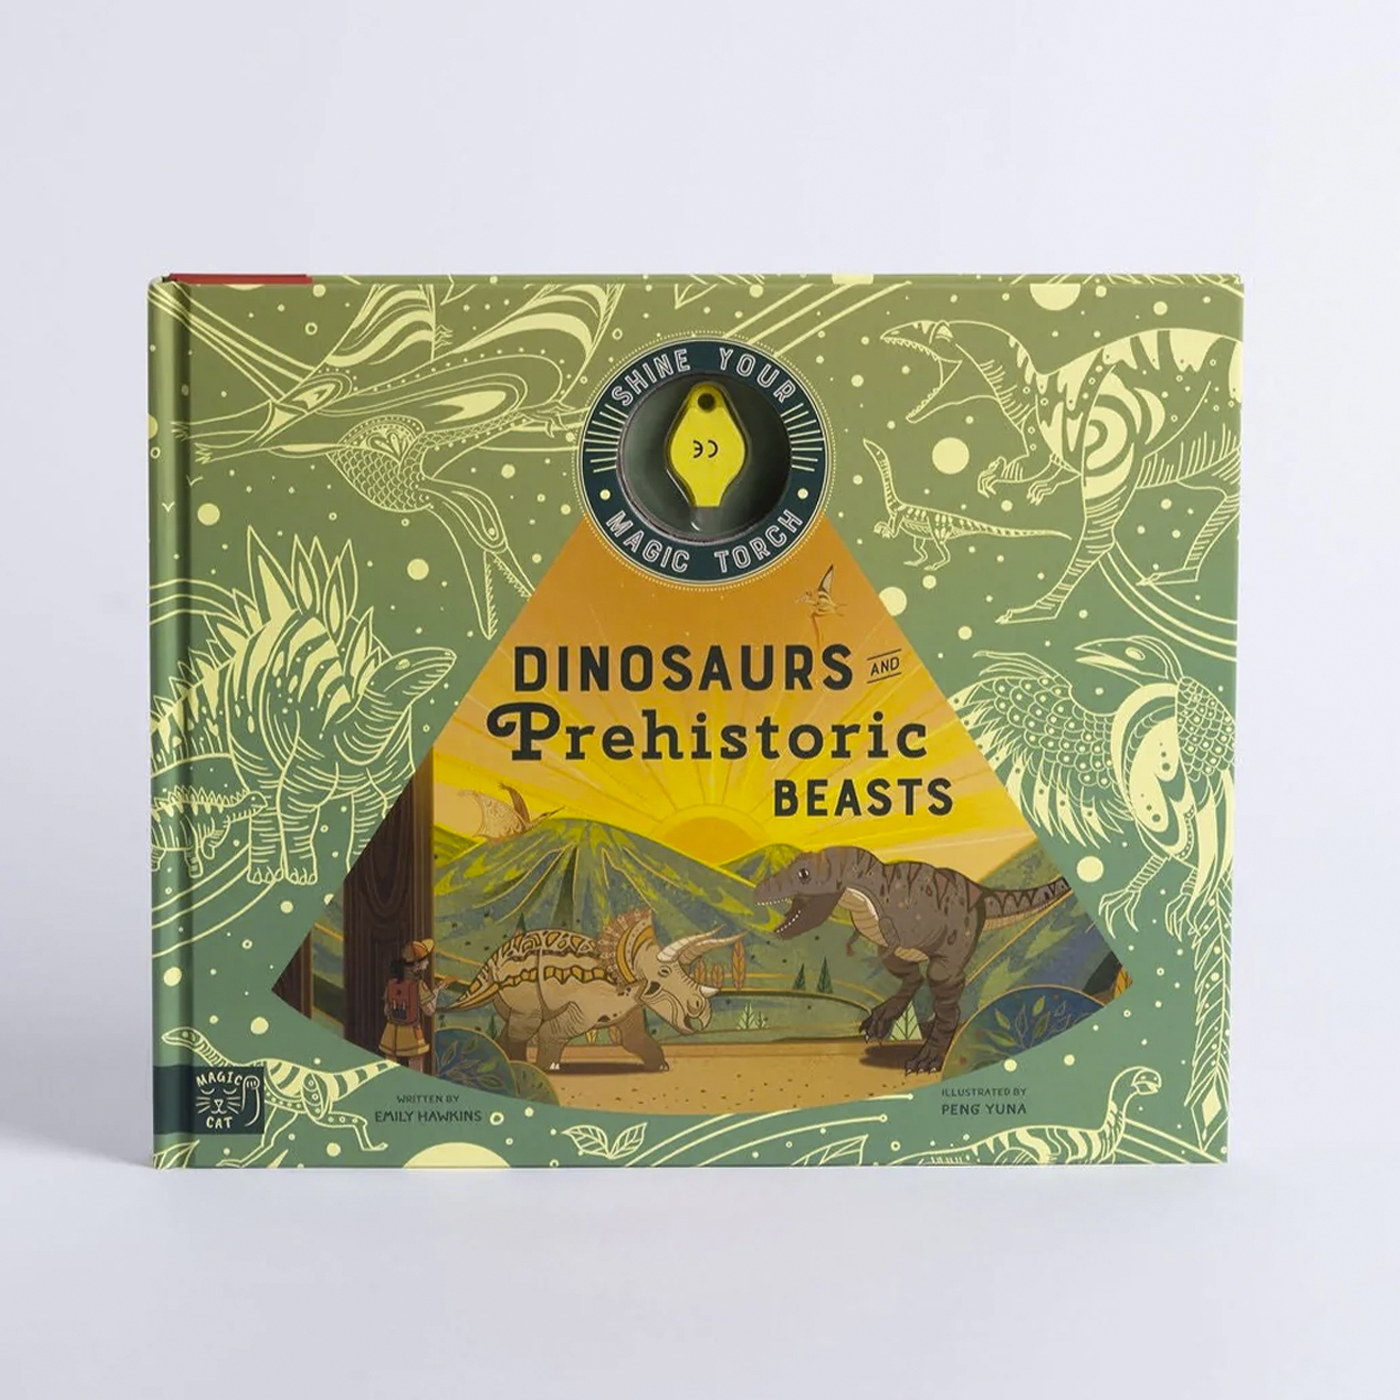  Dinosaurs And Prehistoric Beasts